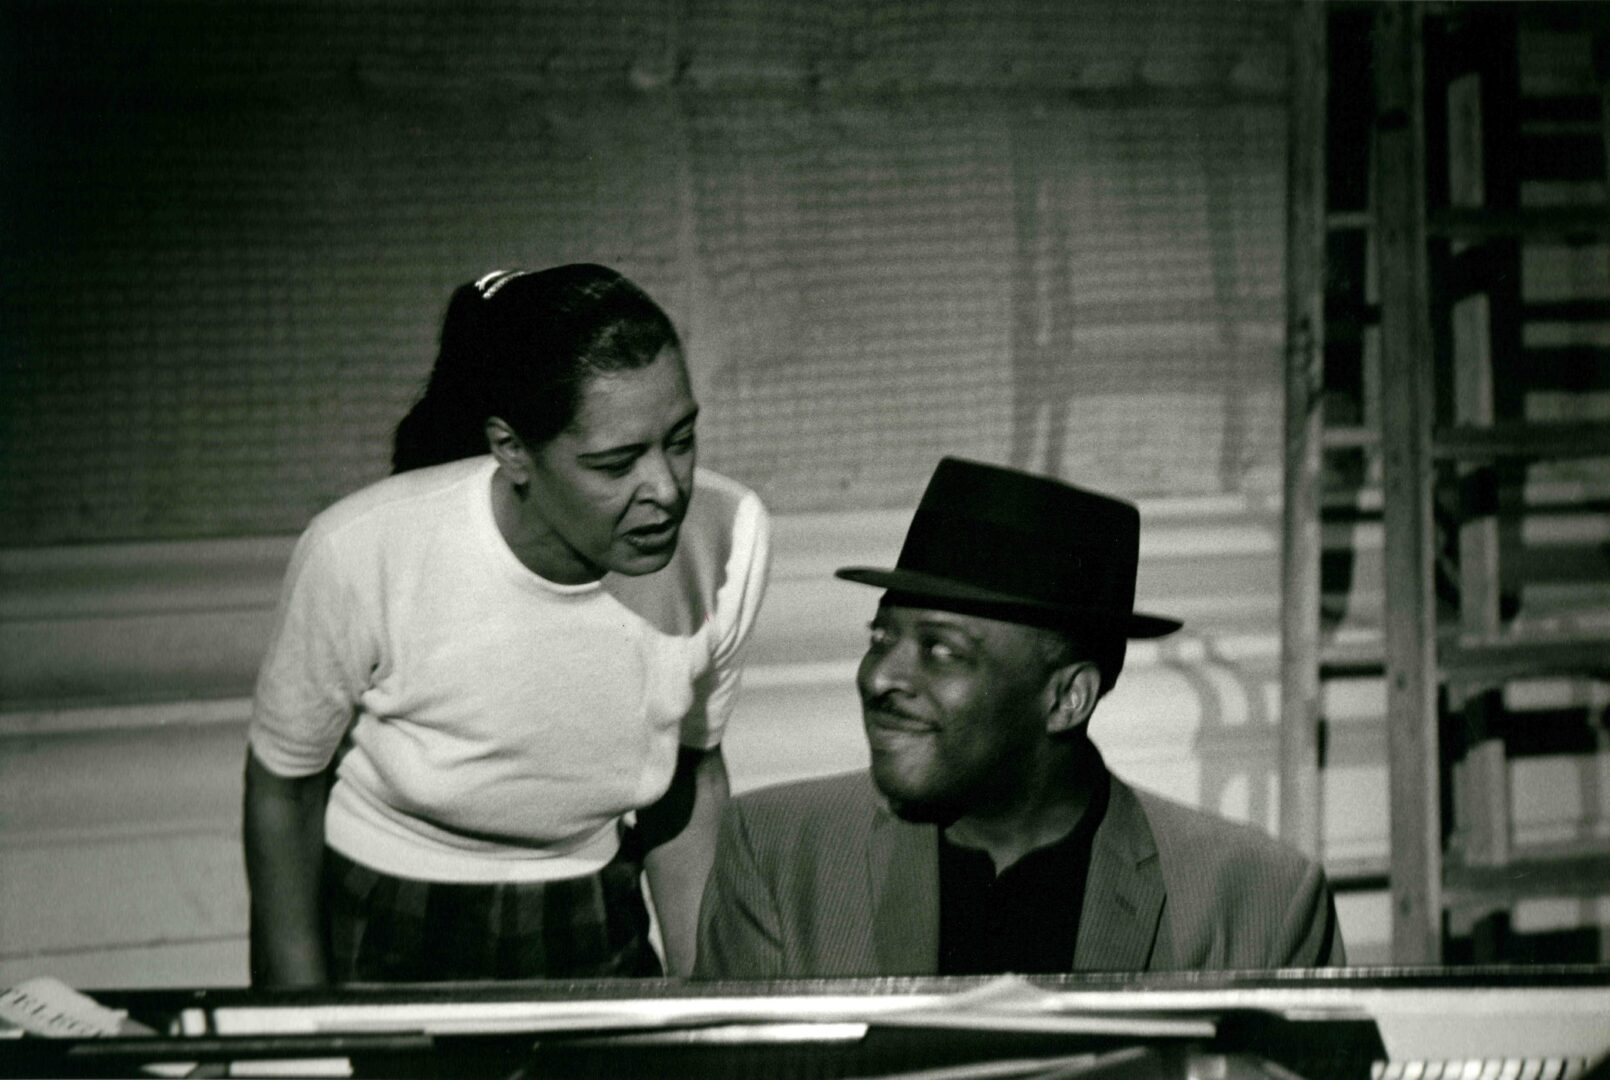 Milt Hinton Vicksburg, MS 1910–2000 New York City Billie Holiday and Count Basie, television studio, NYC, 1957, 1957 Gelatin silver print Gift of Hank O'Neal and Shelley M. Sheir, 2023 2023.18 8 ½ in. x 12 ¾ in. (f) currently unframed FF19 Condition: checked